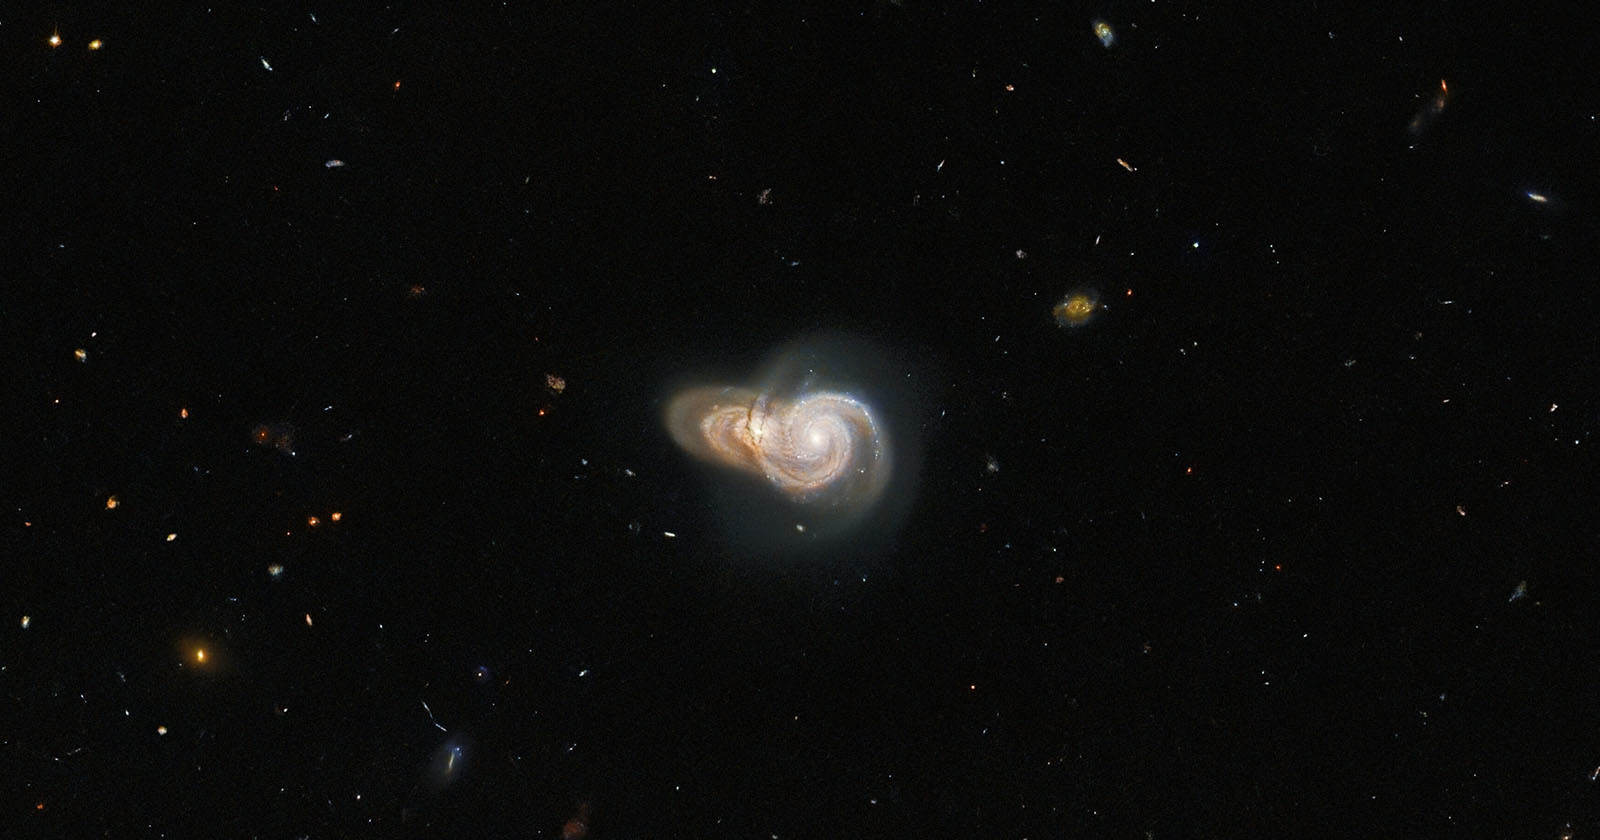  hubble captures optical illusion two spiral galaxies colliding 